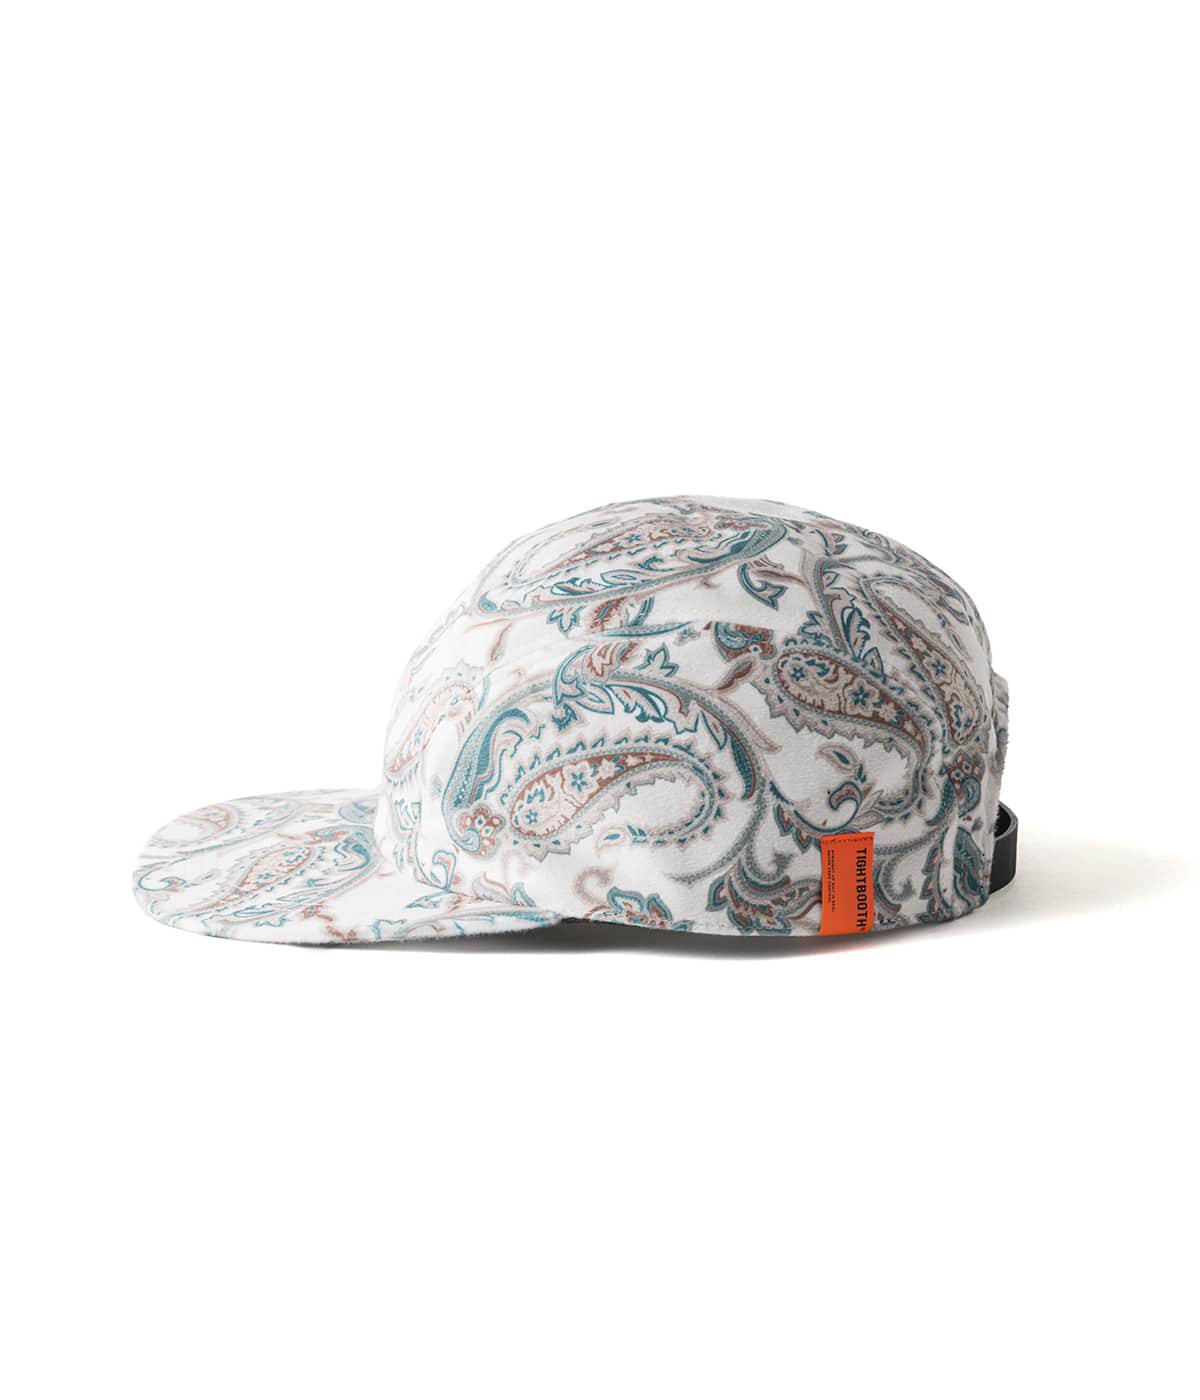 TBPR paisley velor hat - ハット